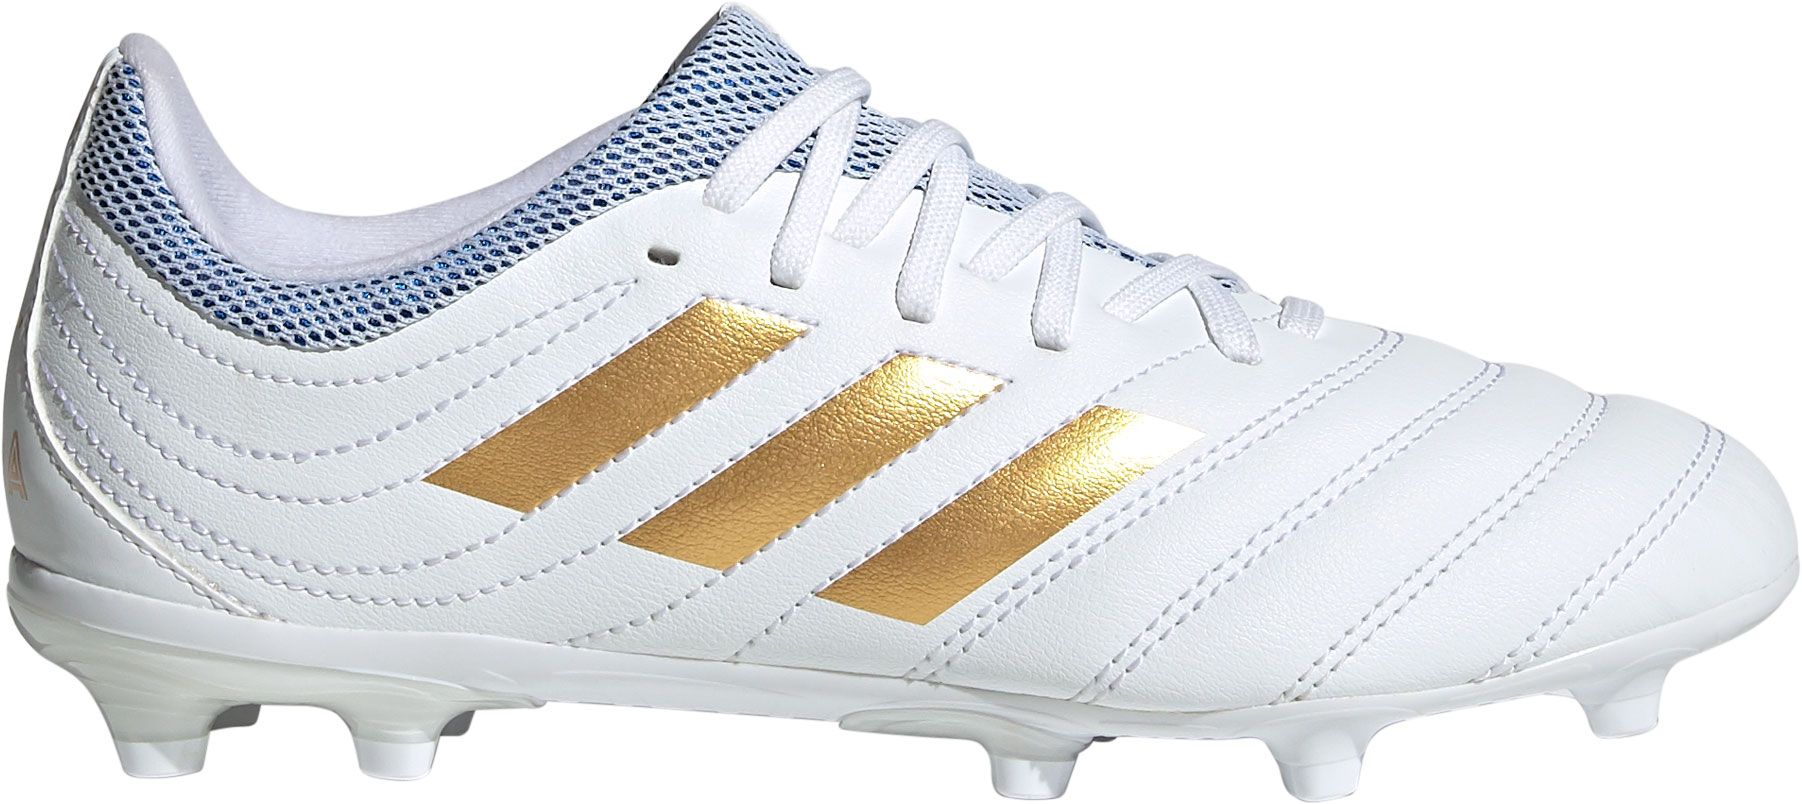 adidas copa youth cleats